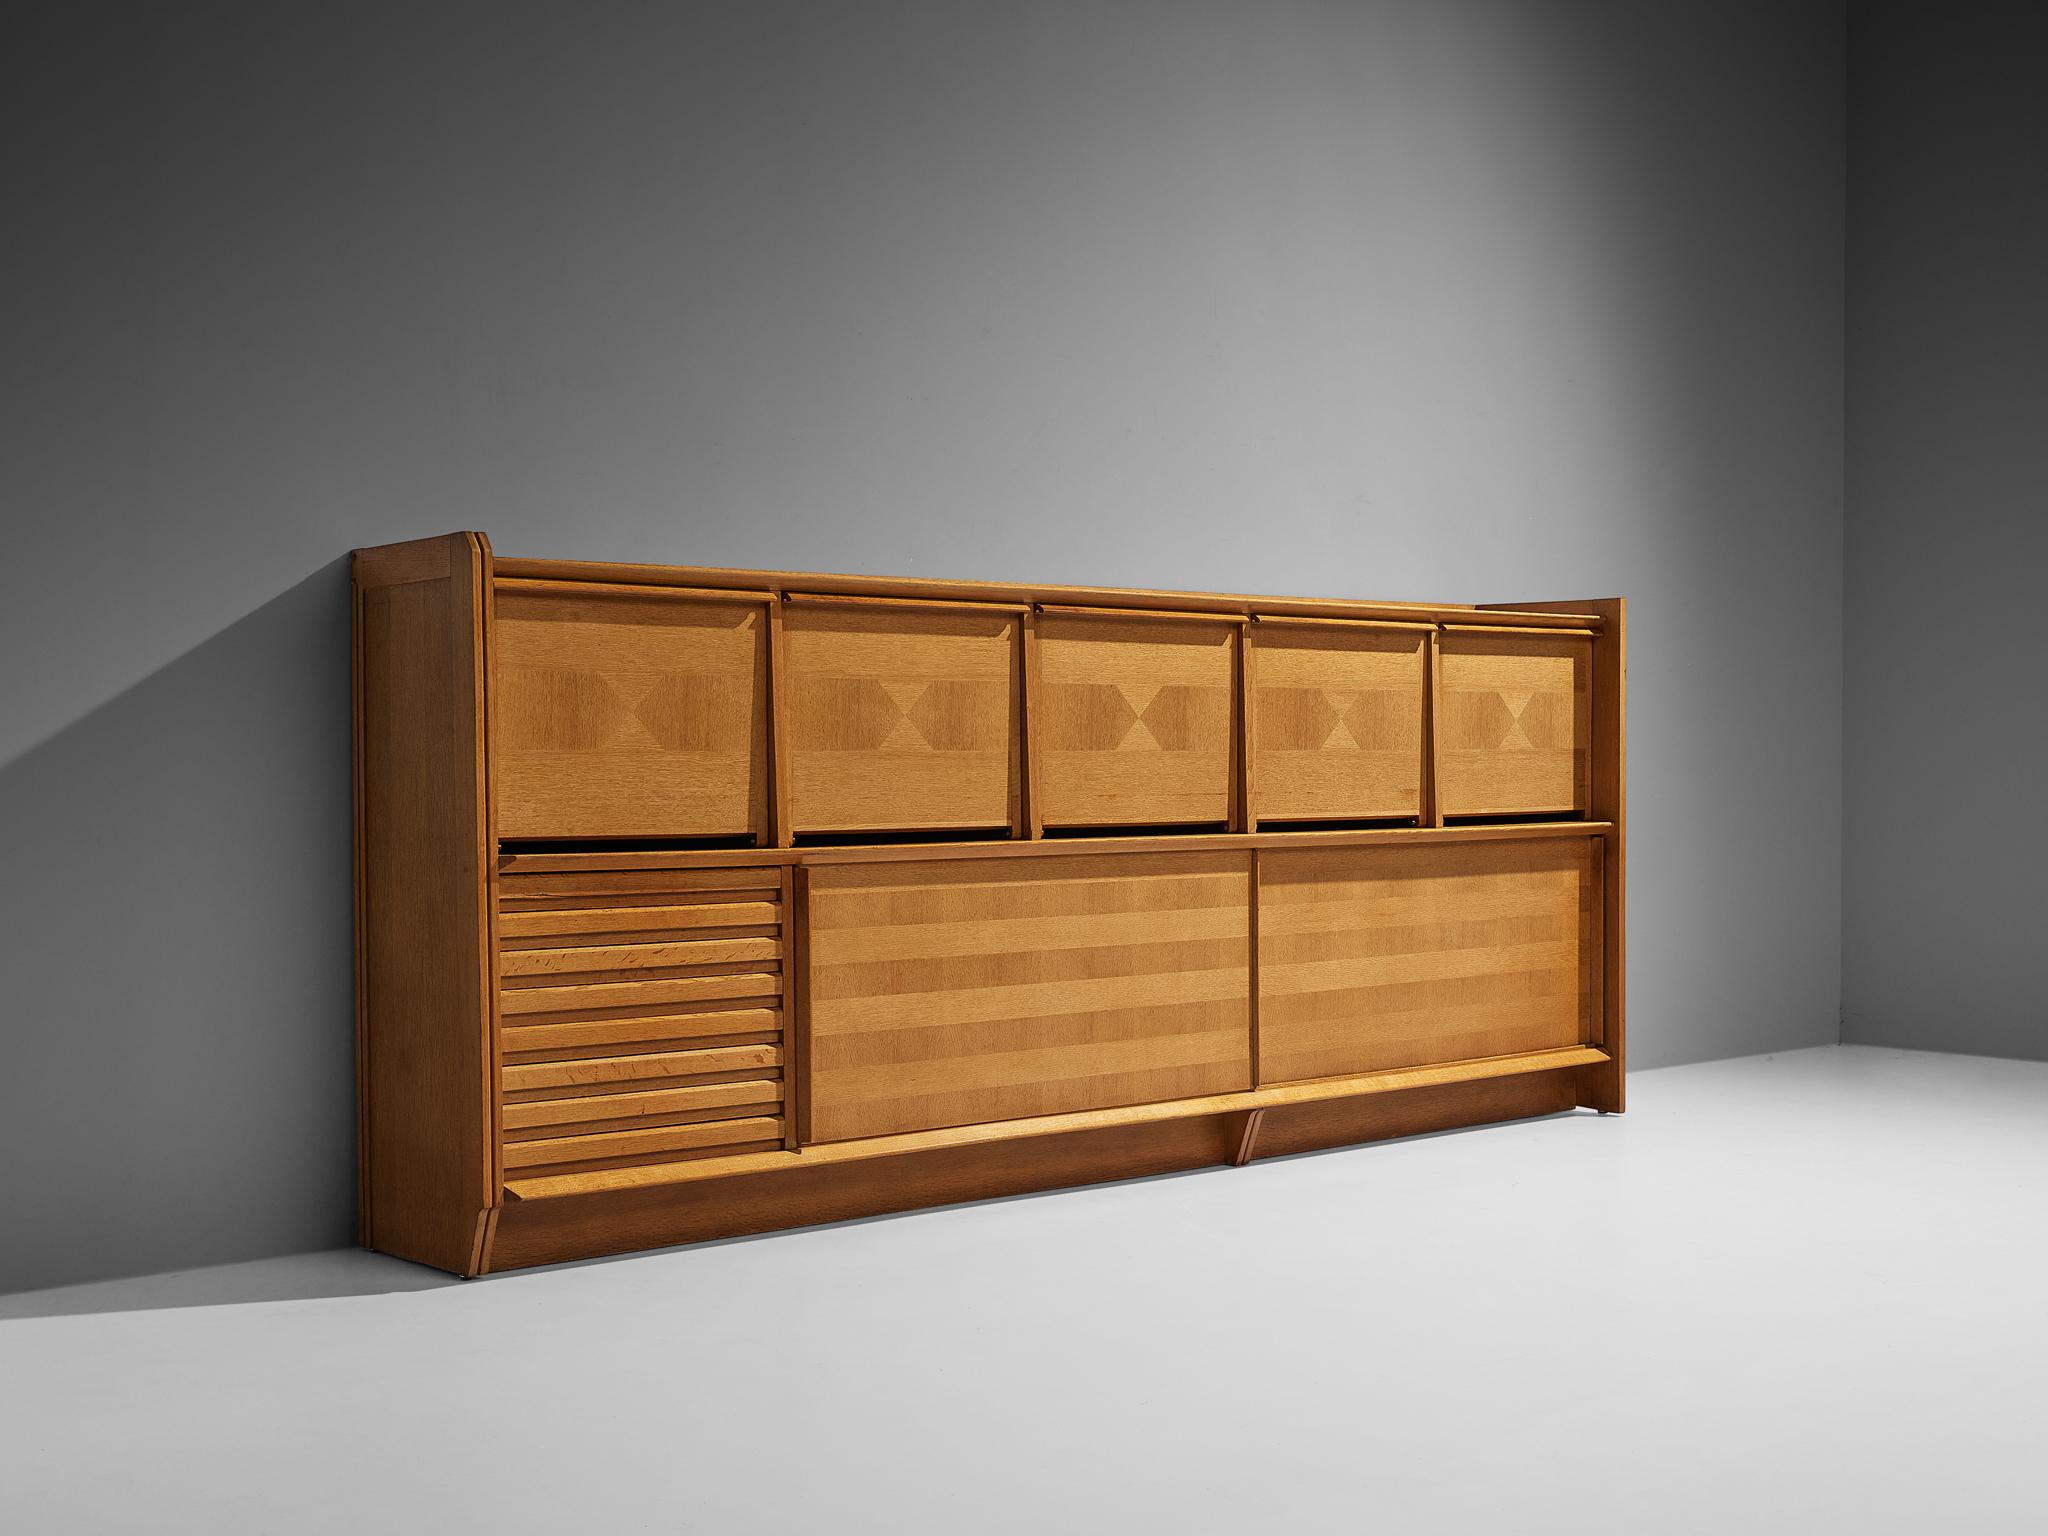 Guillerme et Chambron for Votre Maison, large sideboard, oak, France, 1960s. 

This exceptionally large storage unit designed by French designer duo Guillerme et Chambron is truly something you cannot easily overlook. With its width of 11.8 feet,